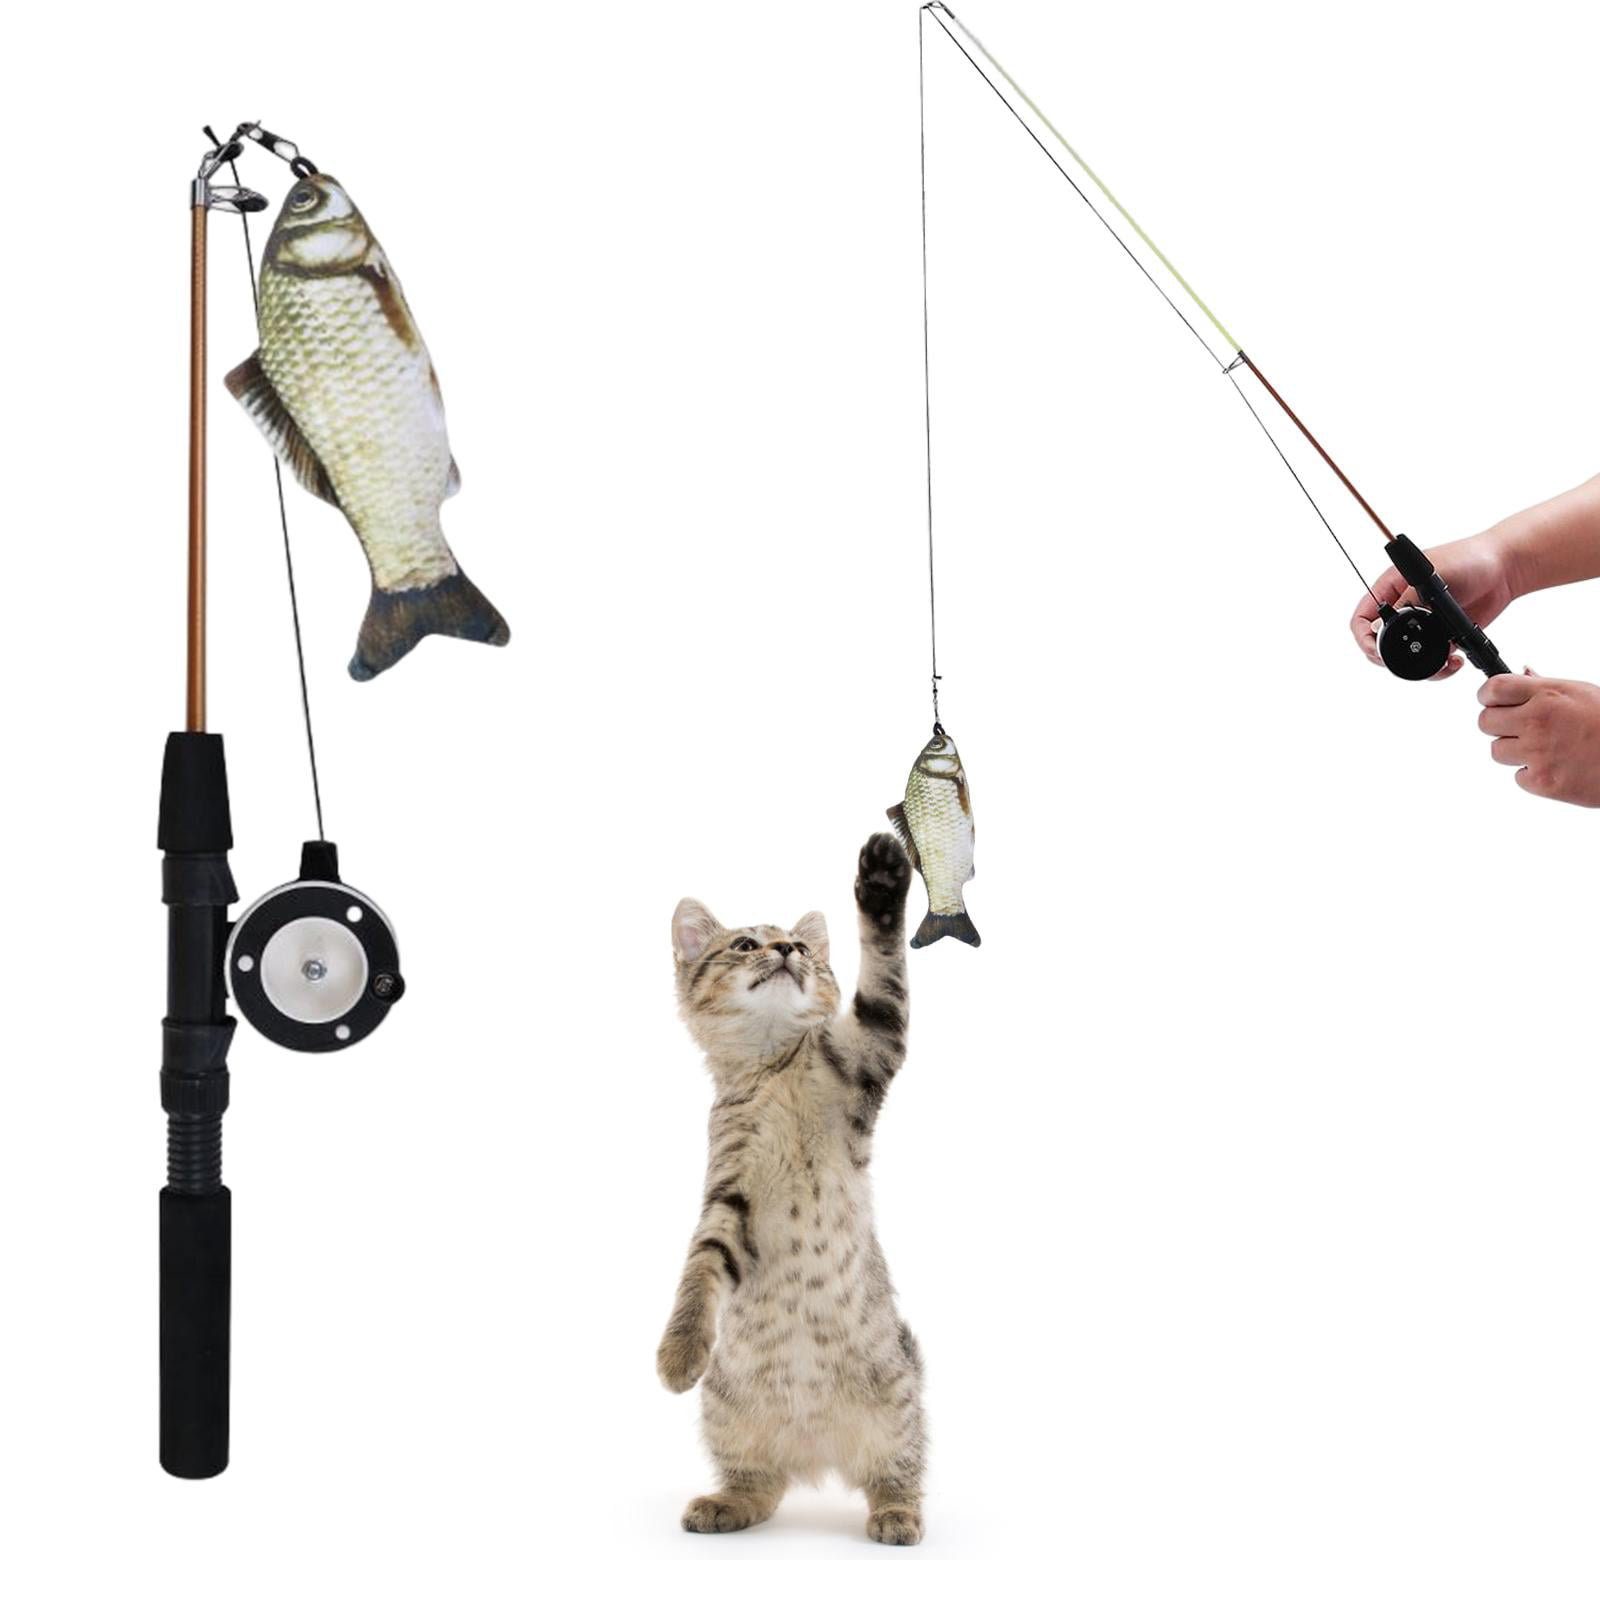 Interactive Retractable Fishing Pole Educational Fun Toy Catching,  Adjustable Cat Teaser Toy Catcher Exerciser for Kitty, Dog, Training Grass  Carp 